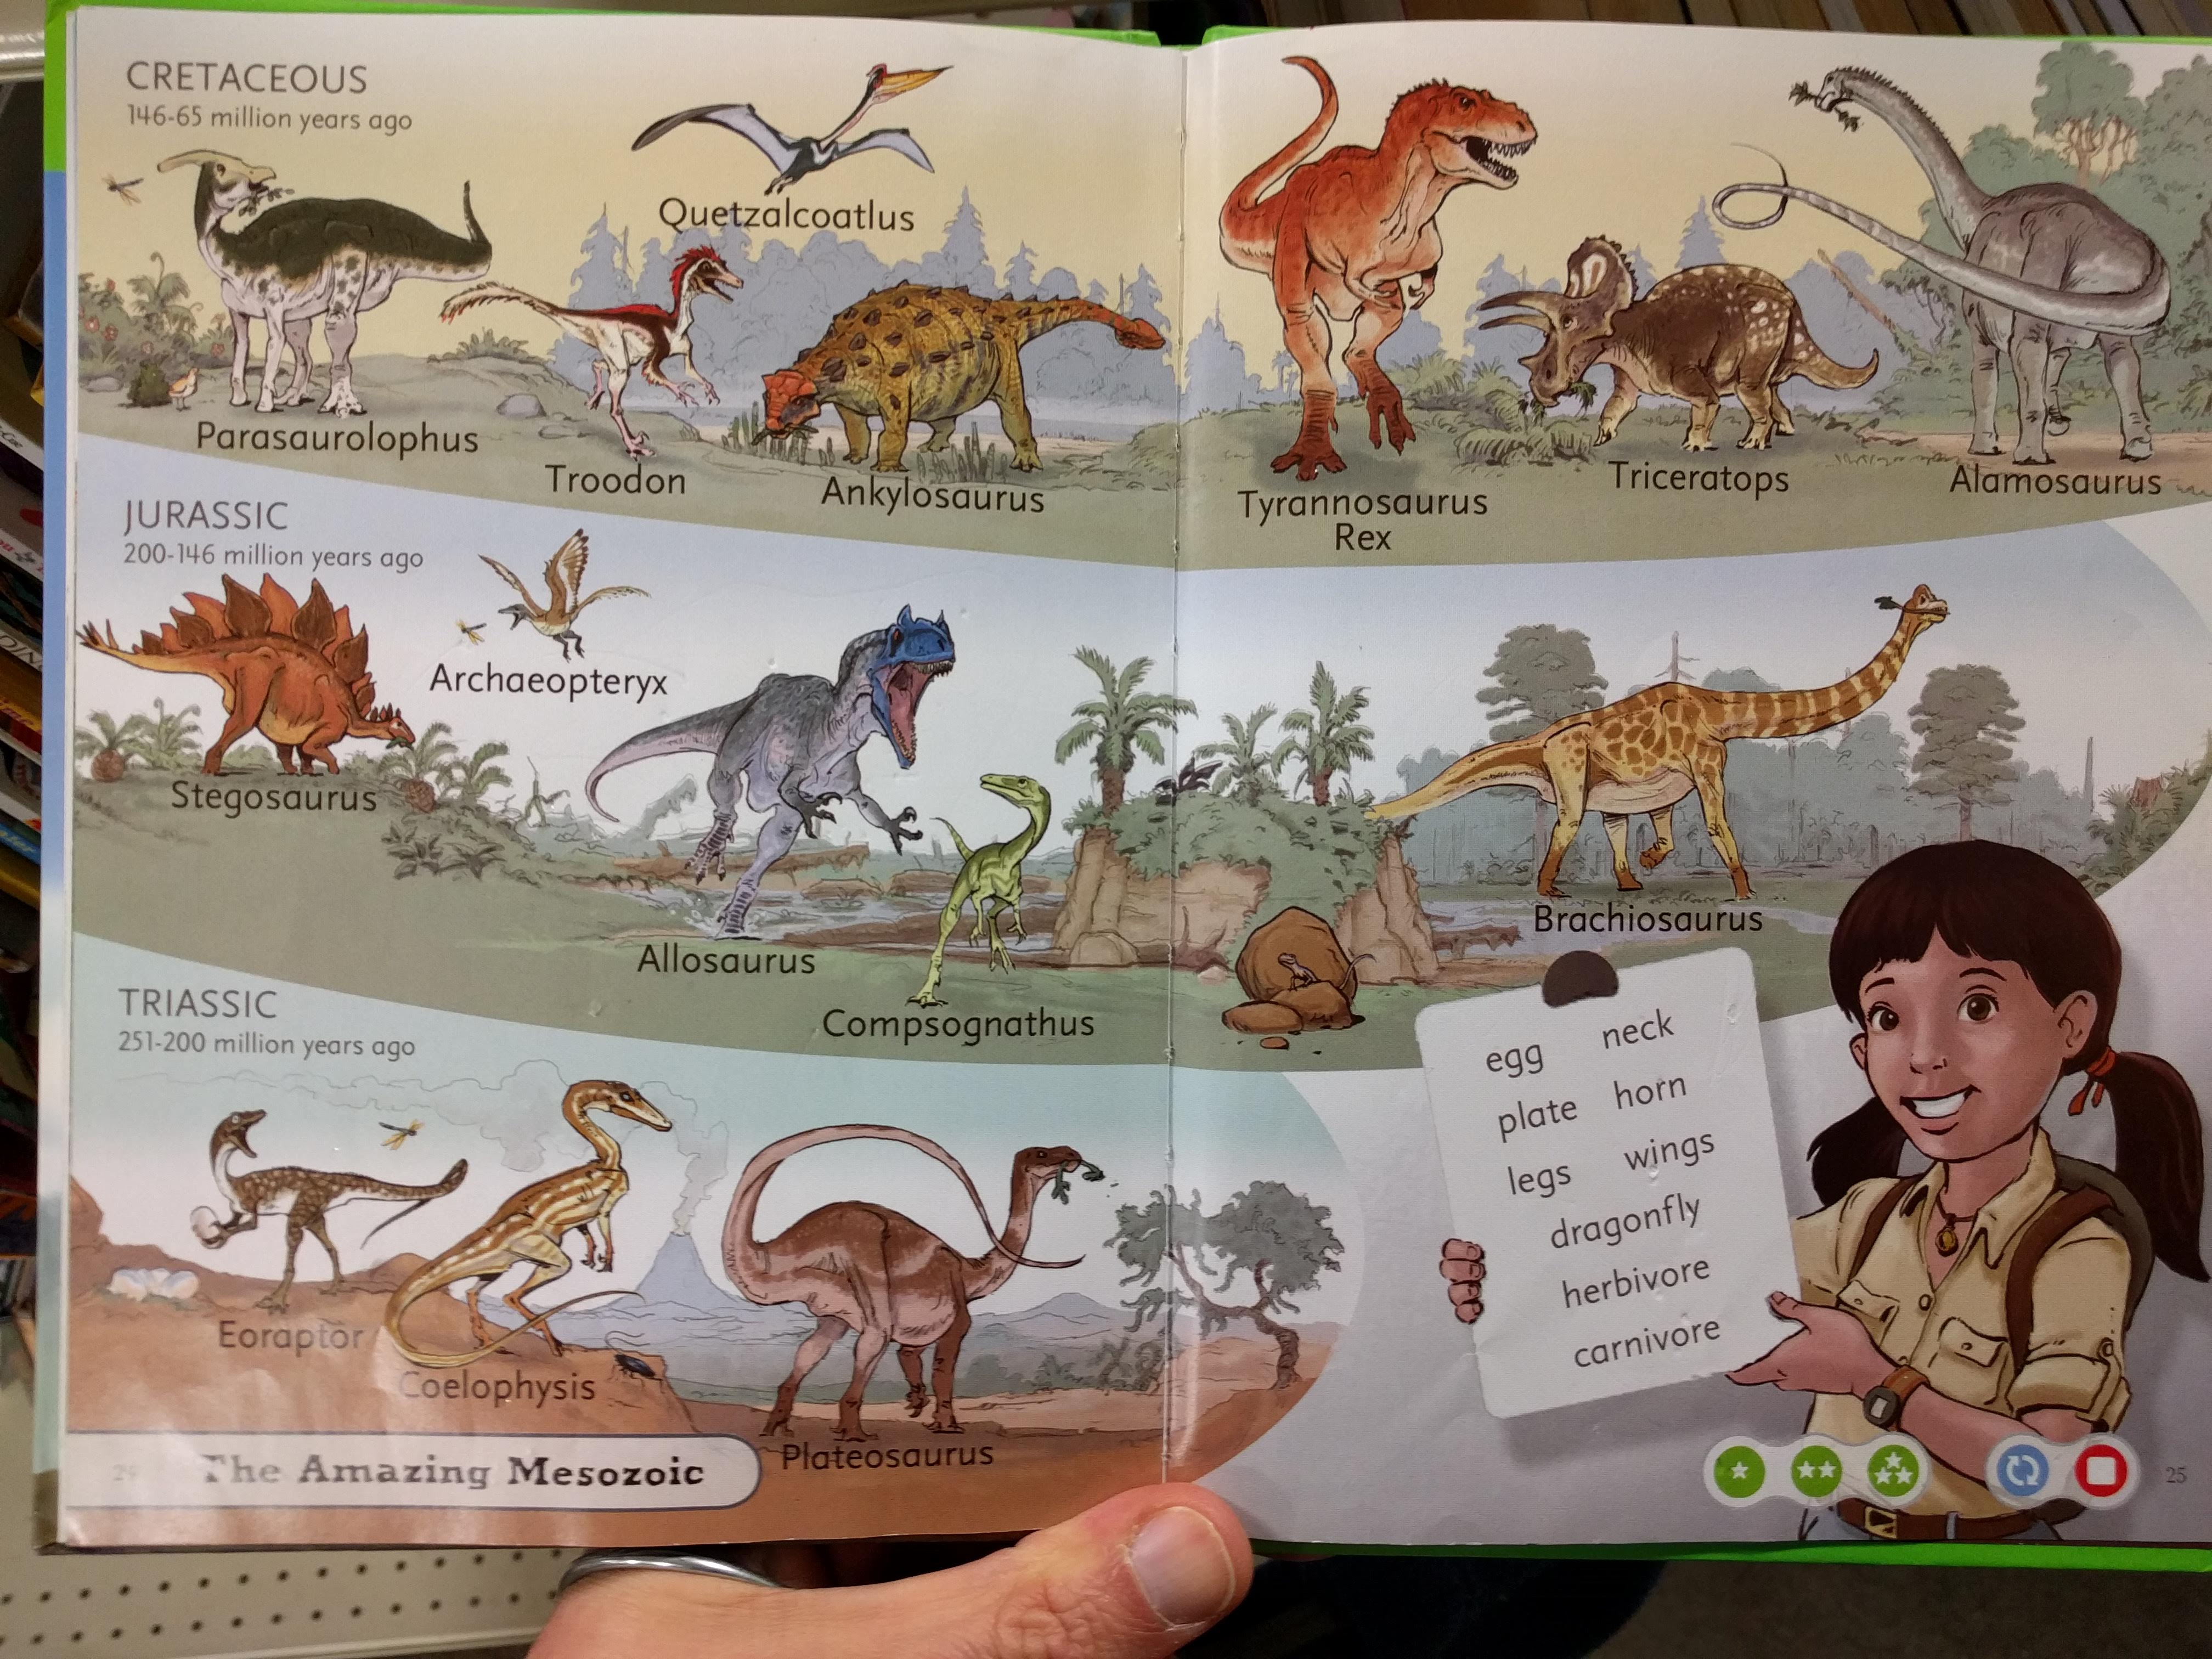 Interior pages of T. Rex's Mighty Roar, depicting an illustrated geological timeline of the Mesozoic era